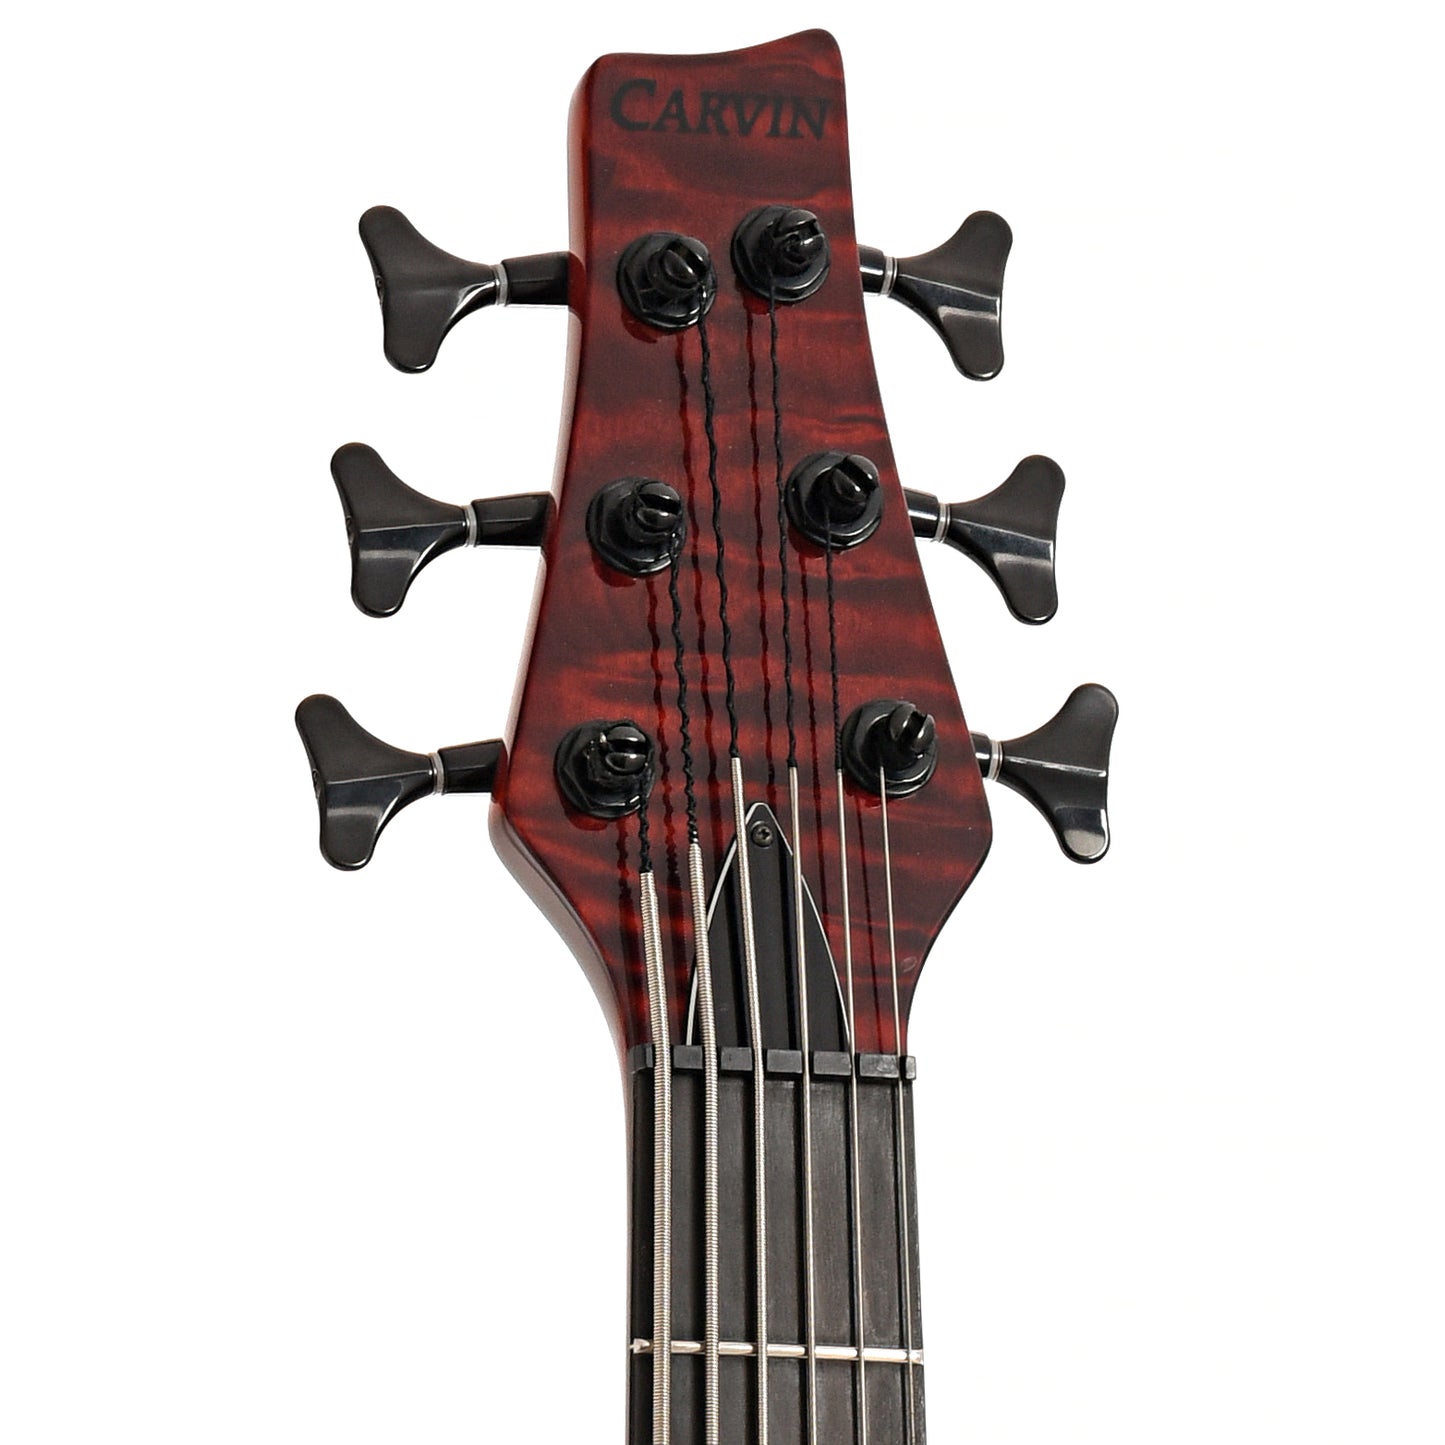 Front headstock of Carvin LB76